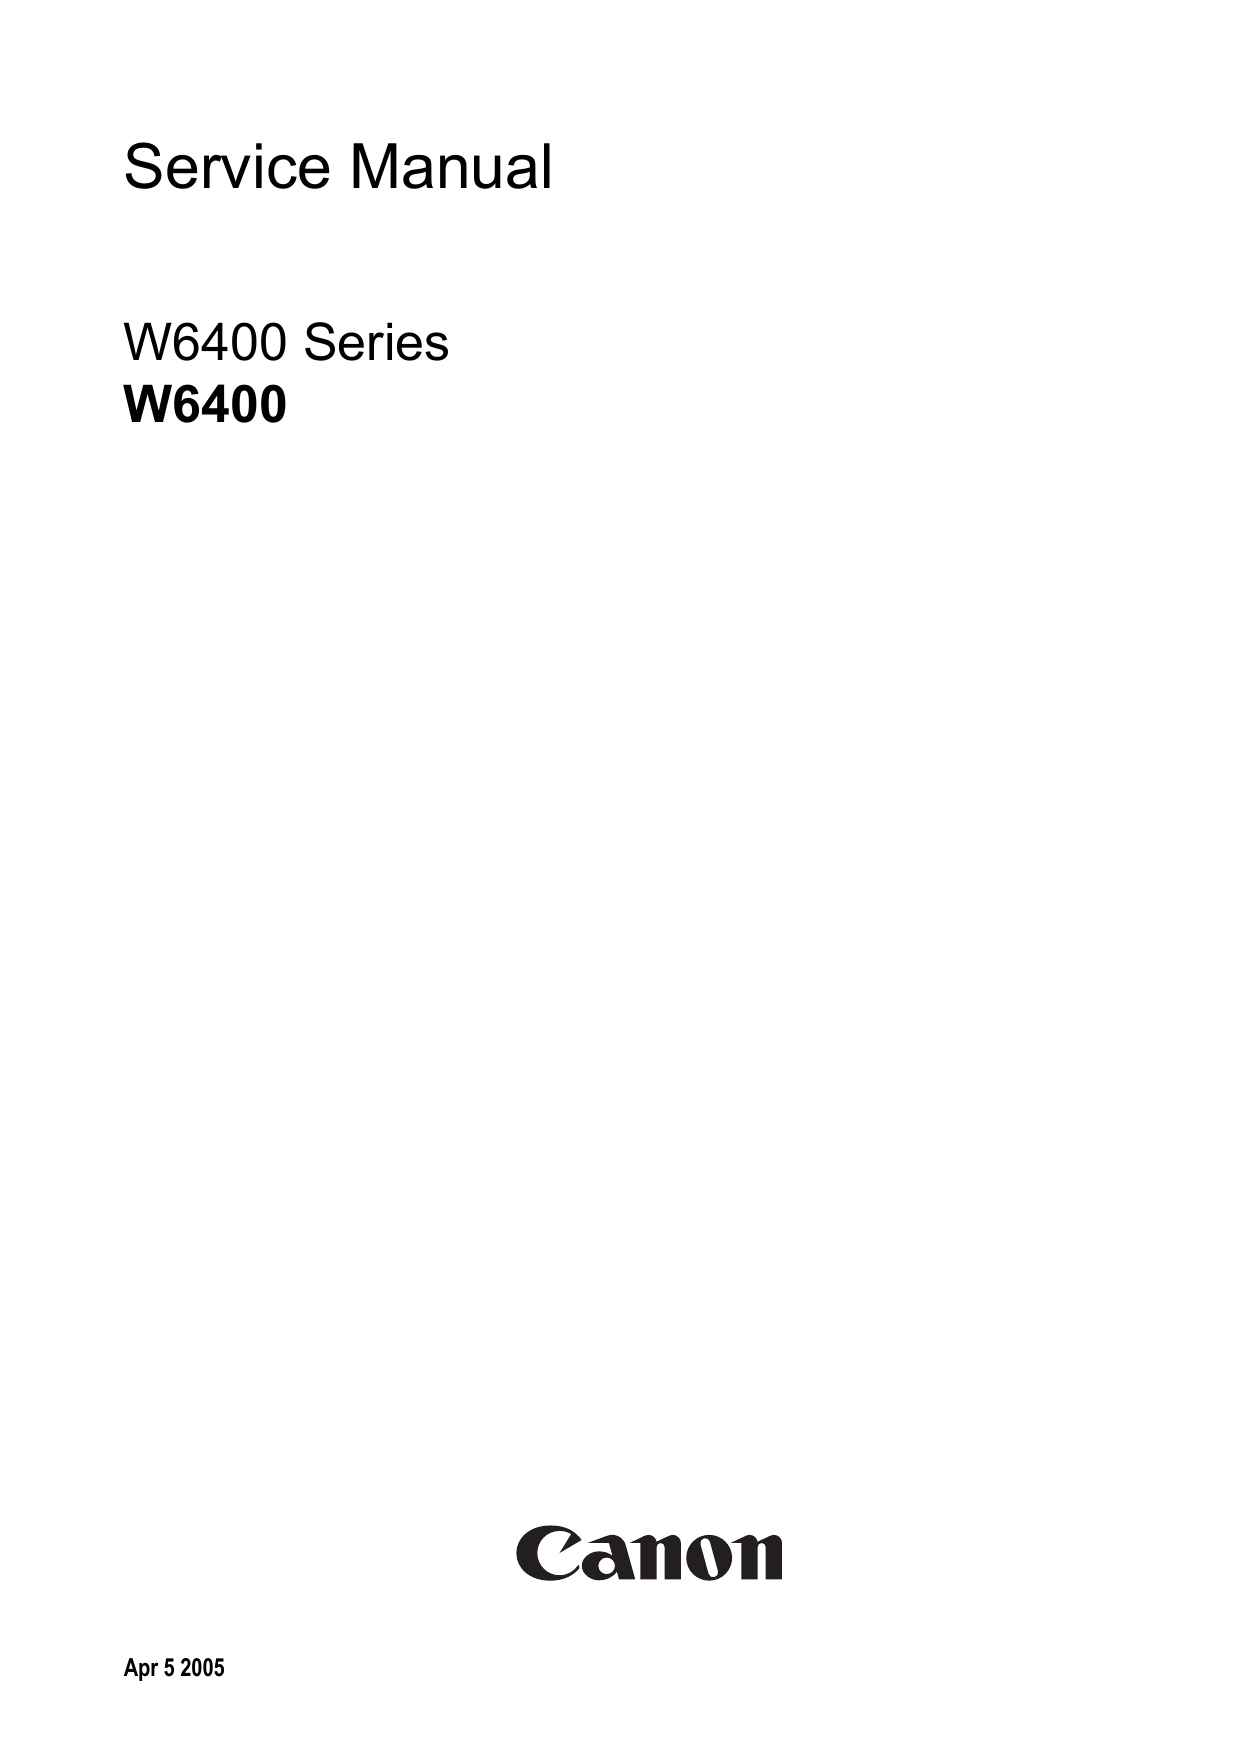 Canon W6400 series wide format printer service manual Preview image 1